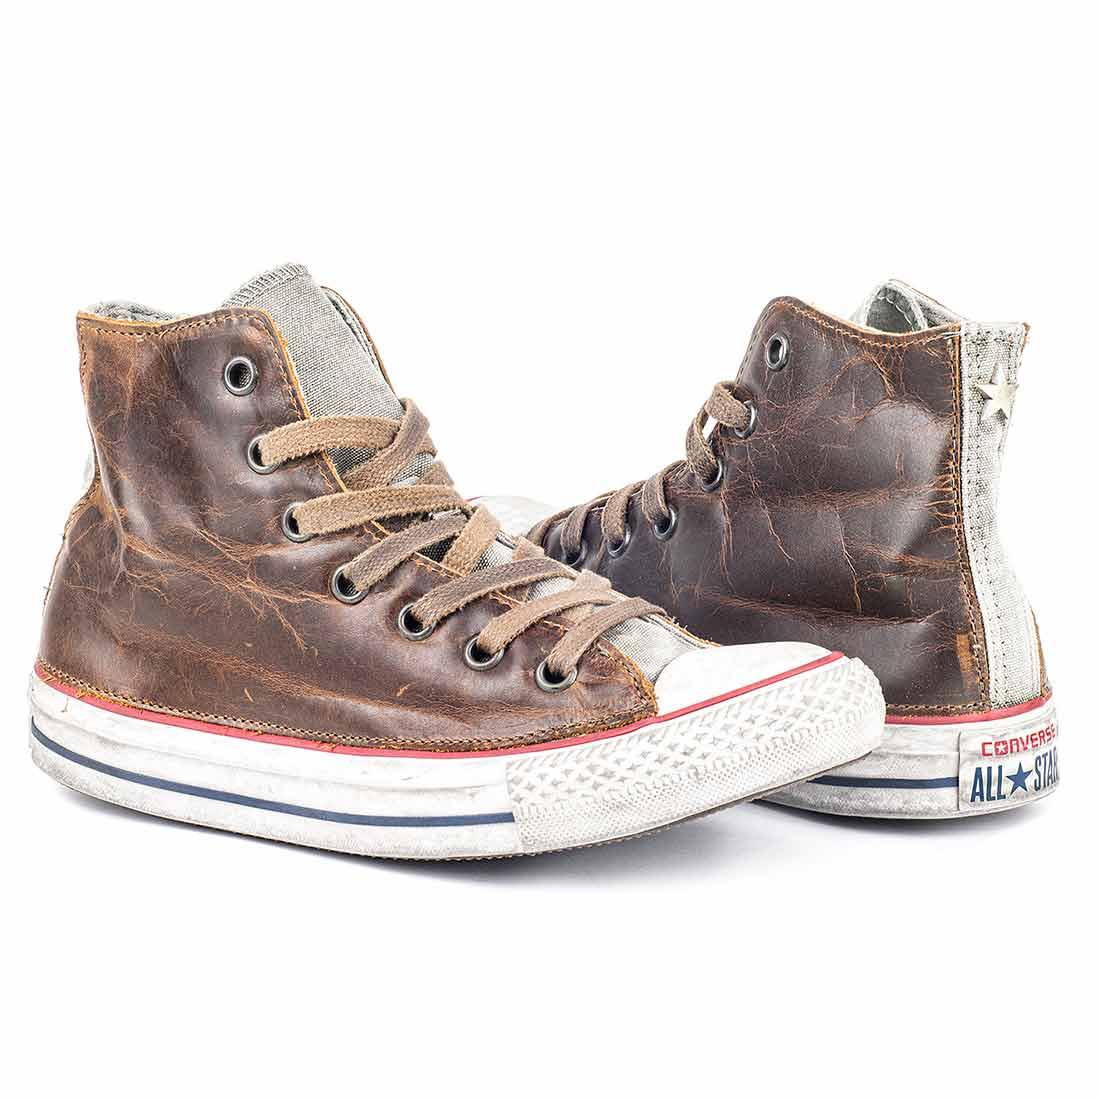 converse bianche limited edition java